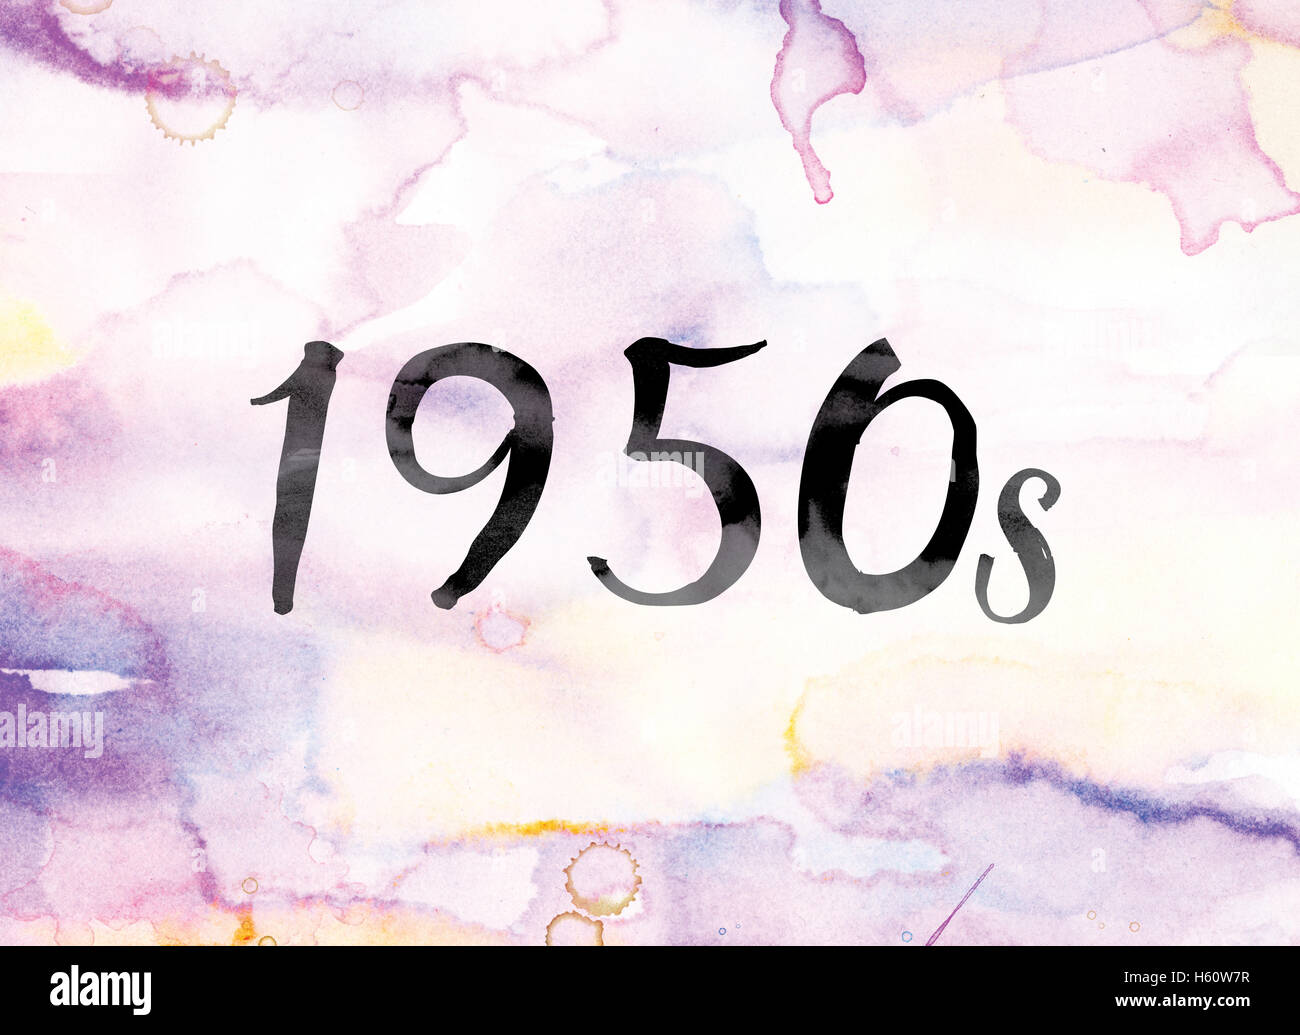 The word '1950s' painted in black ink over a colorful watercolor washed background concept and theme. Stock Photo